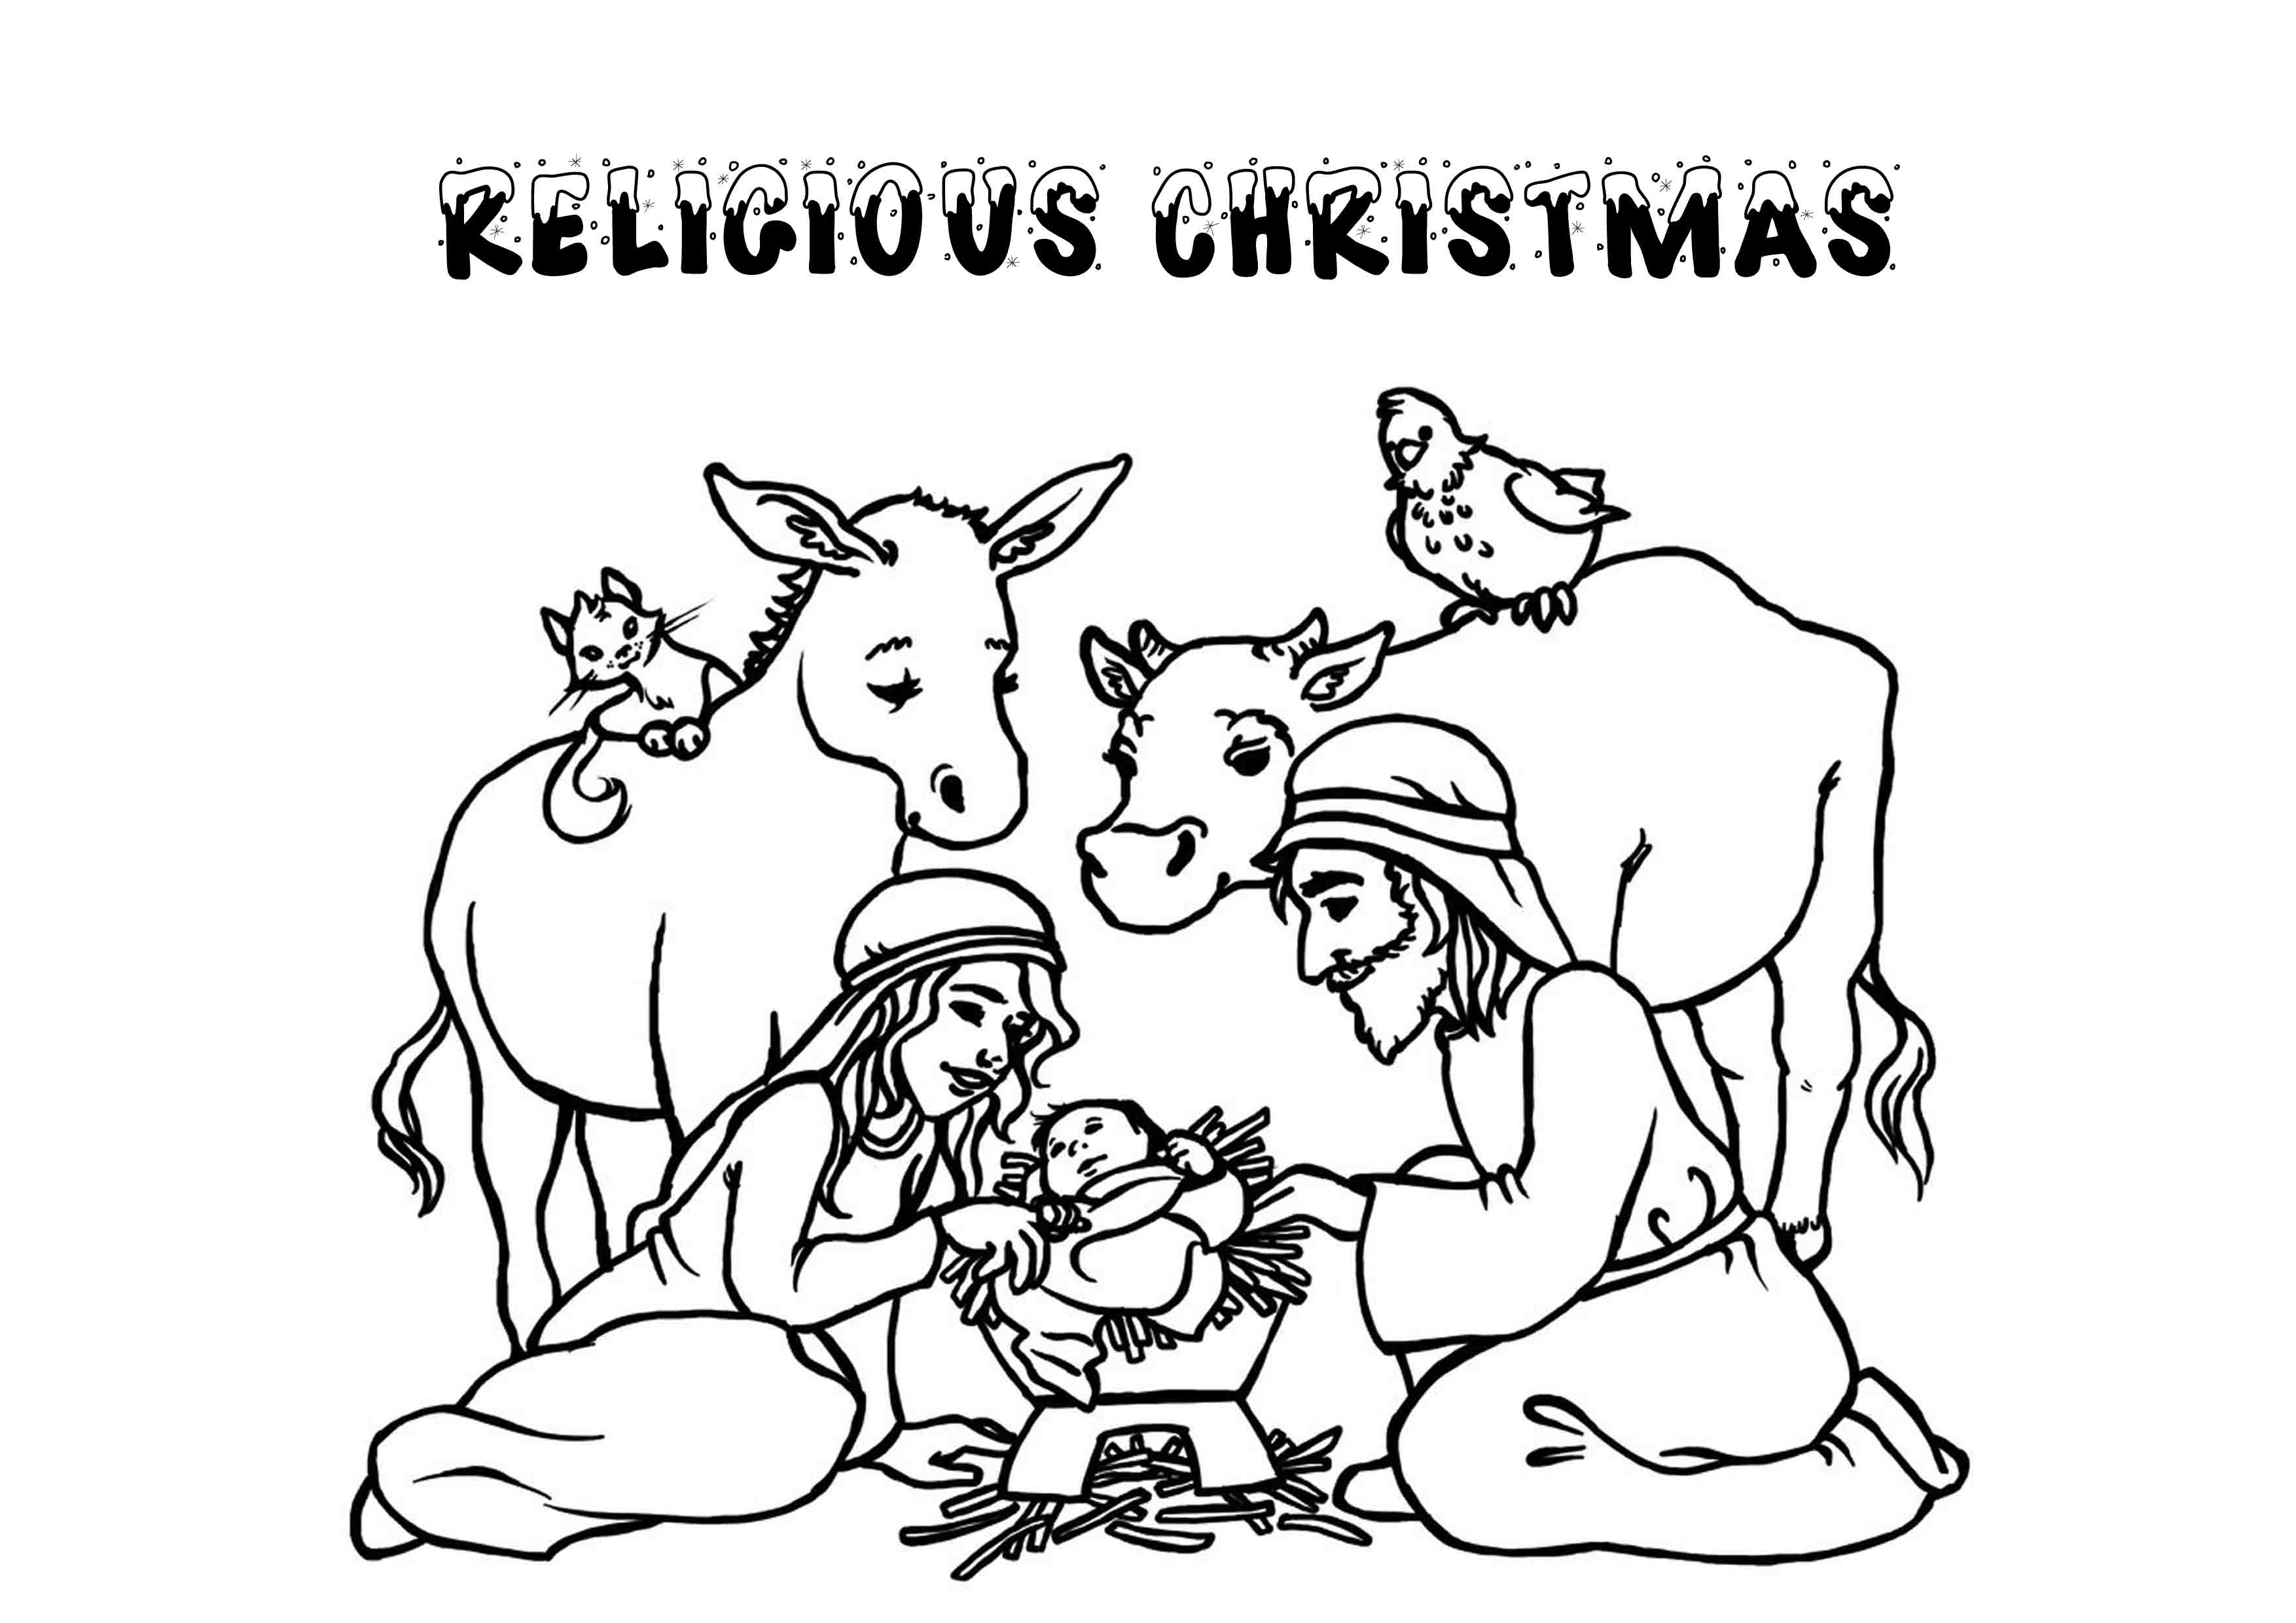 6 Pics Of Jesus Christmas Coloring Pages To Print - Religious